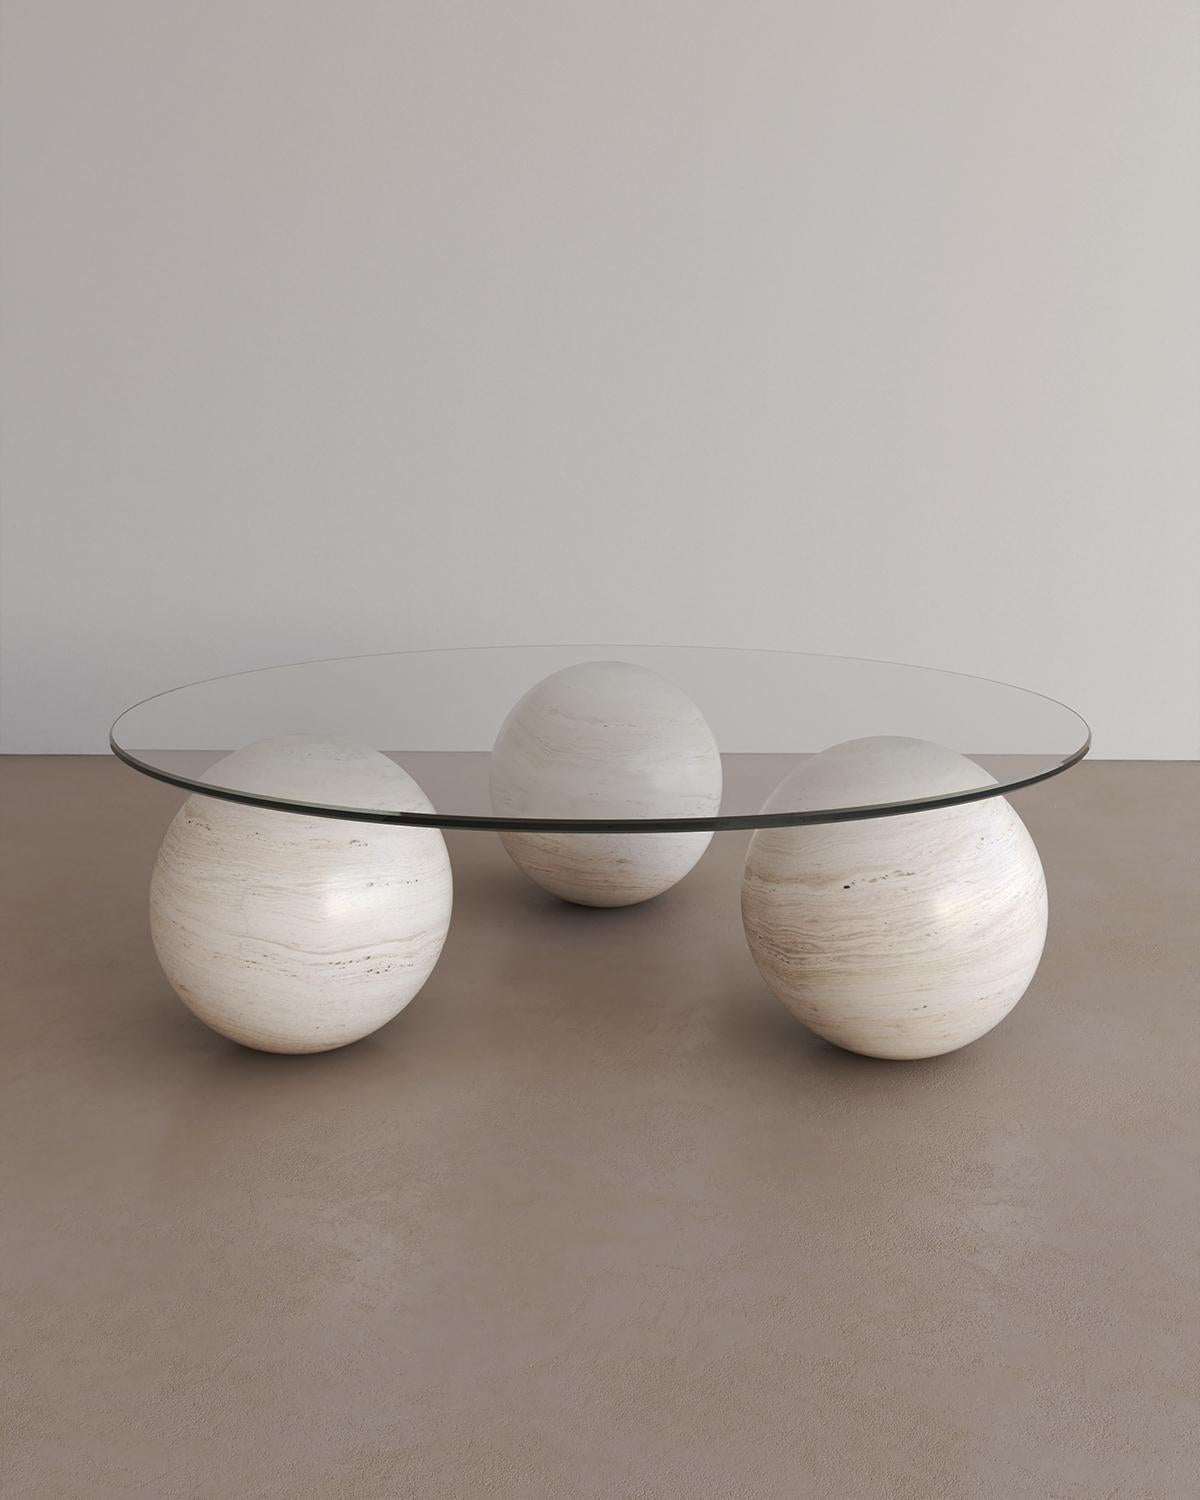 The Sufi coffee table I by The Essentialist celebrates proportion, scale and ancestral power. Filling the room with metaphors of ocean and fragments of sun. This monolithic coffee table embodies the three pillars of the earth intricately bound by